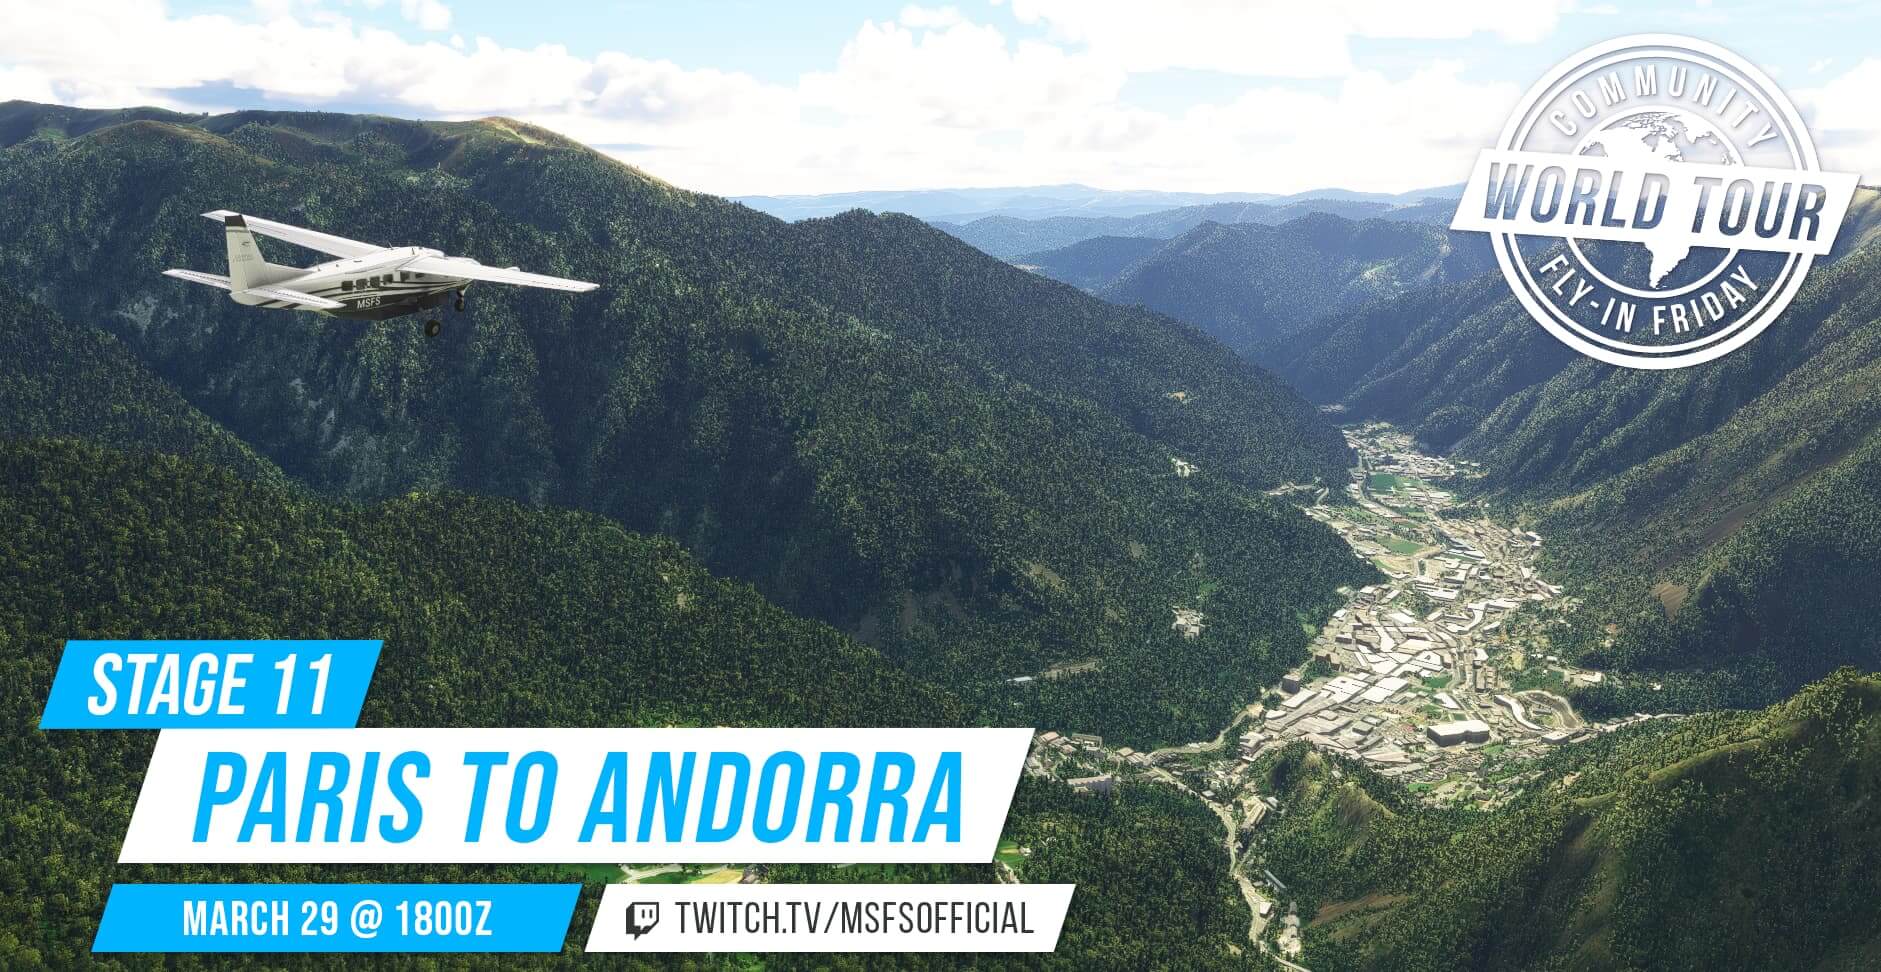 Community Fly-In Friday: World Tour Stage 11, Paris to Andorra. March 29th at 1800 UTC. twitch.tv/msfsofficial